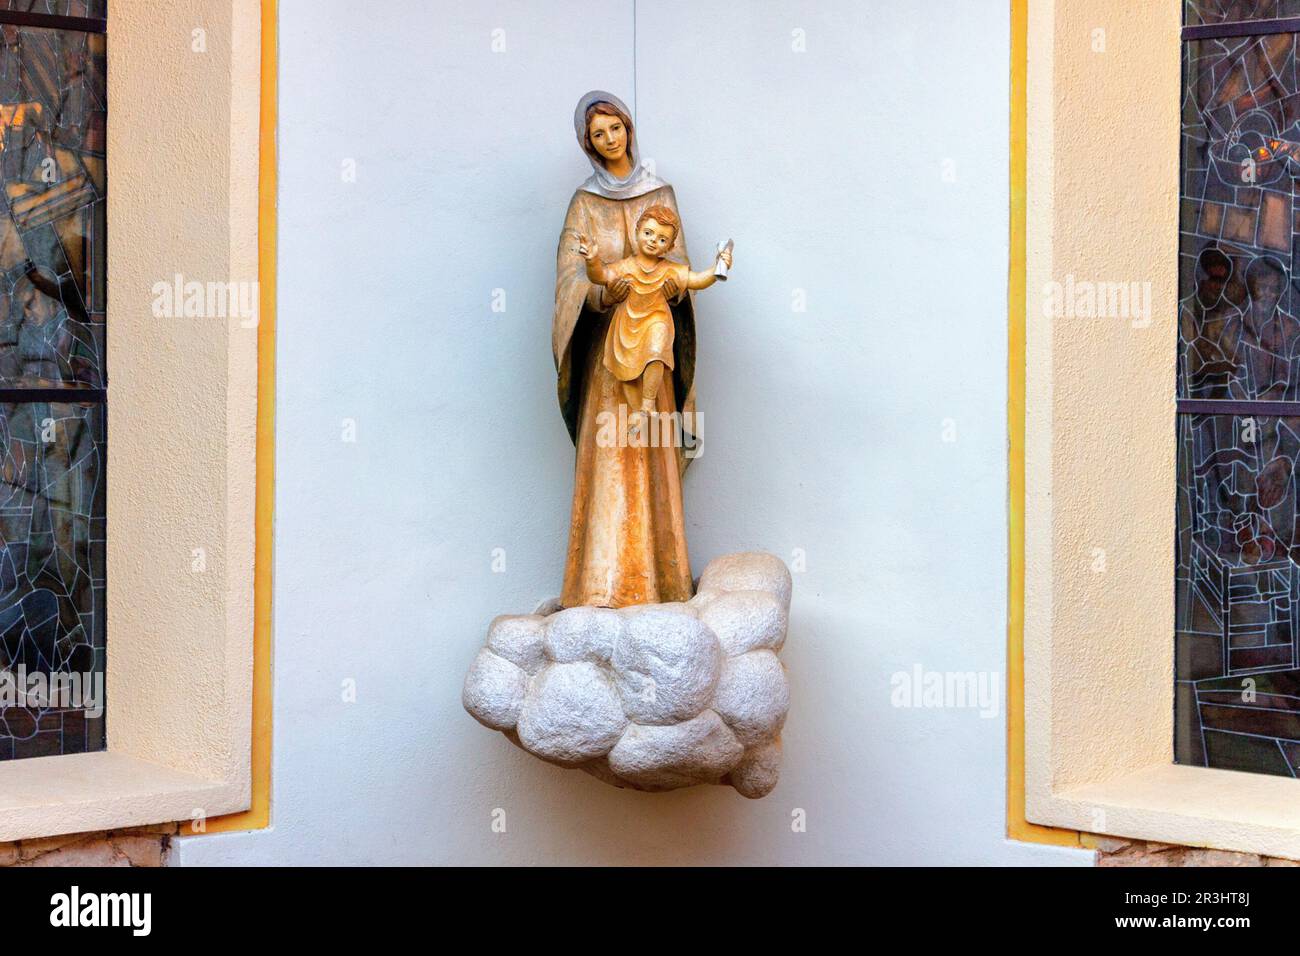 Statue of the Blessed Virgin Mary with Child Jesus in Medjugorje Stock Photo